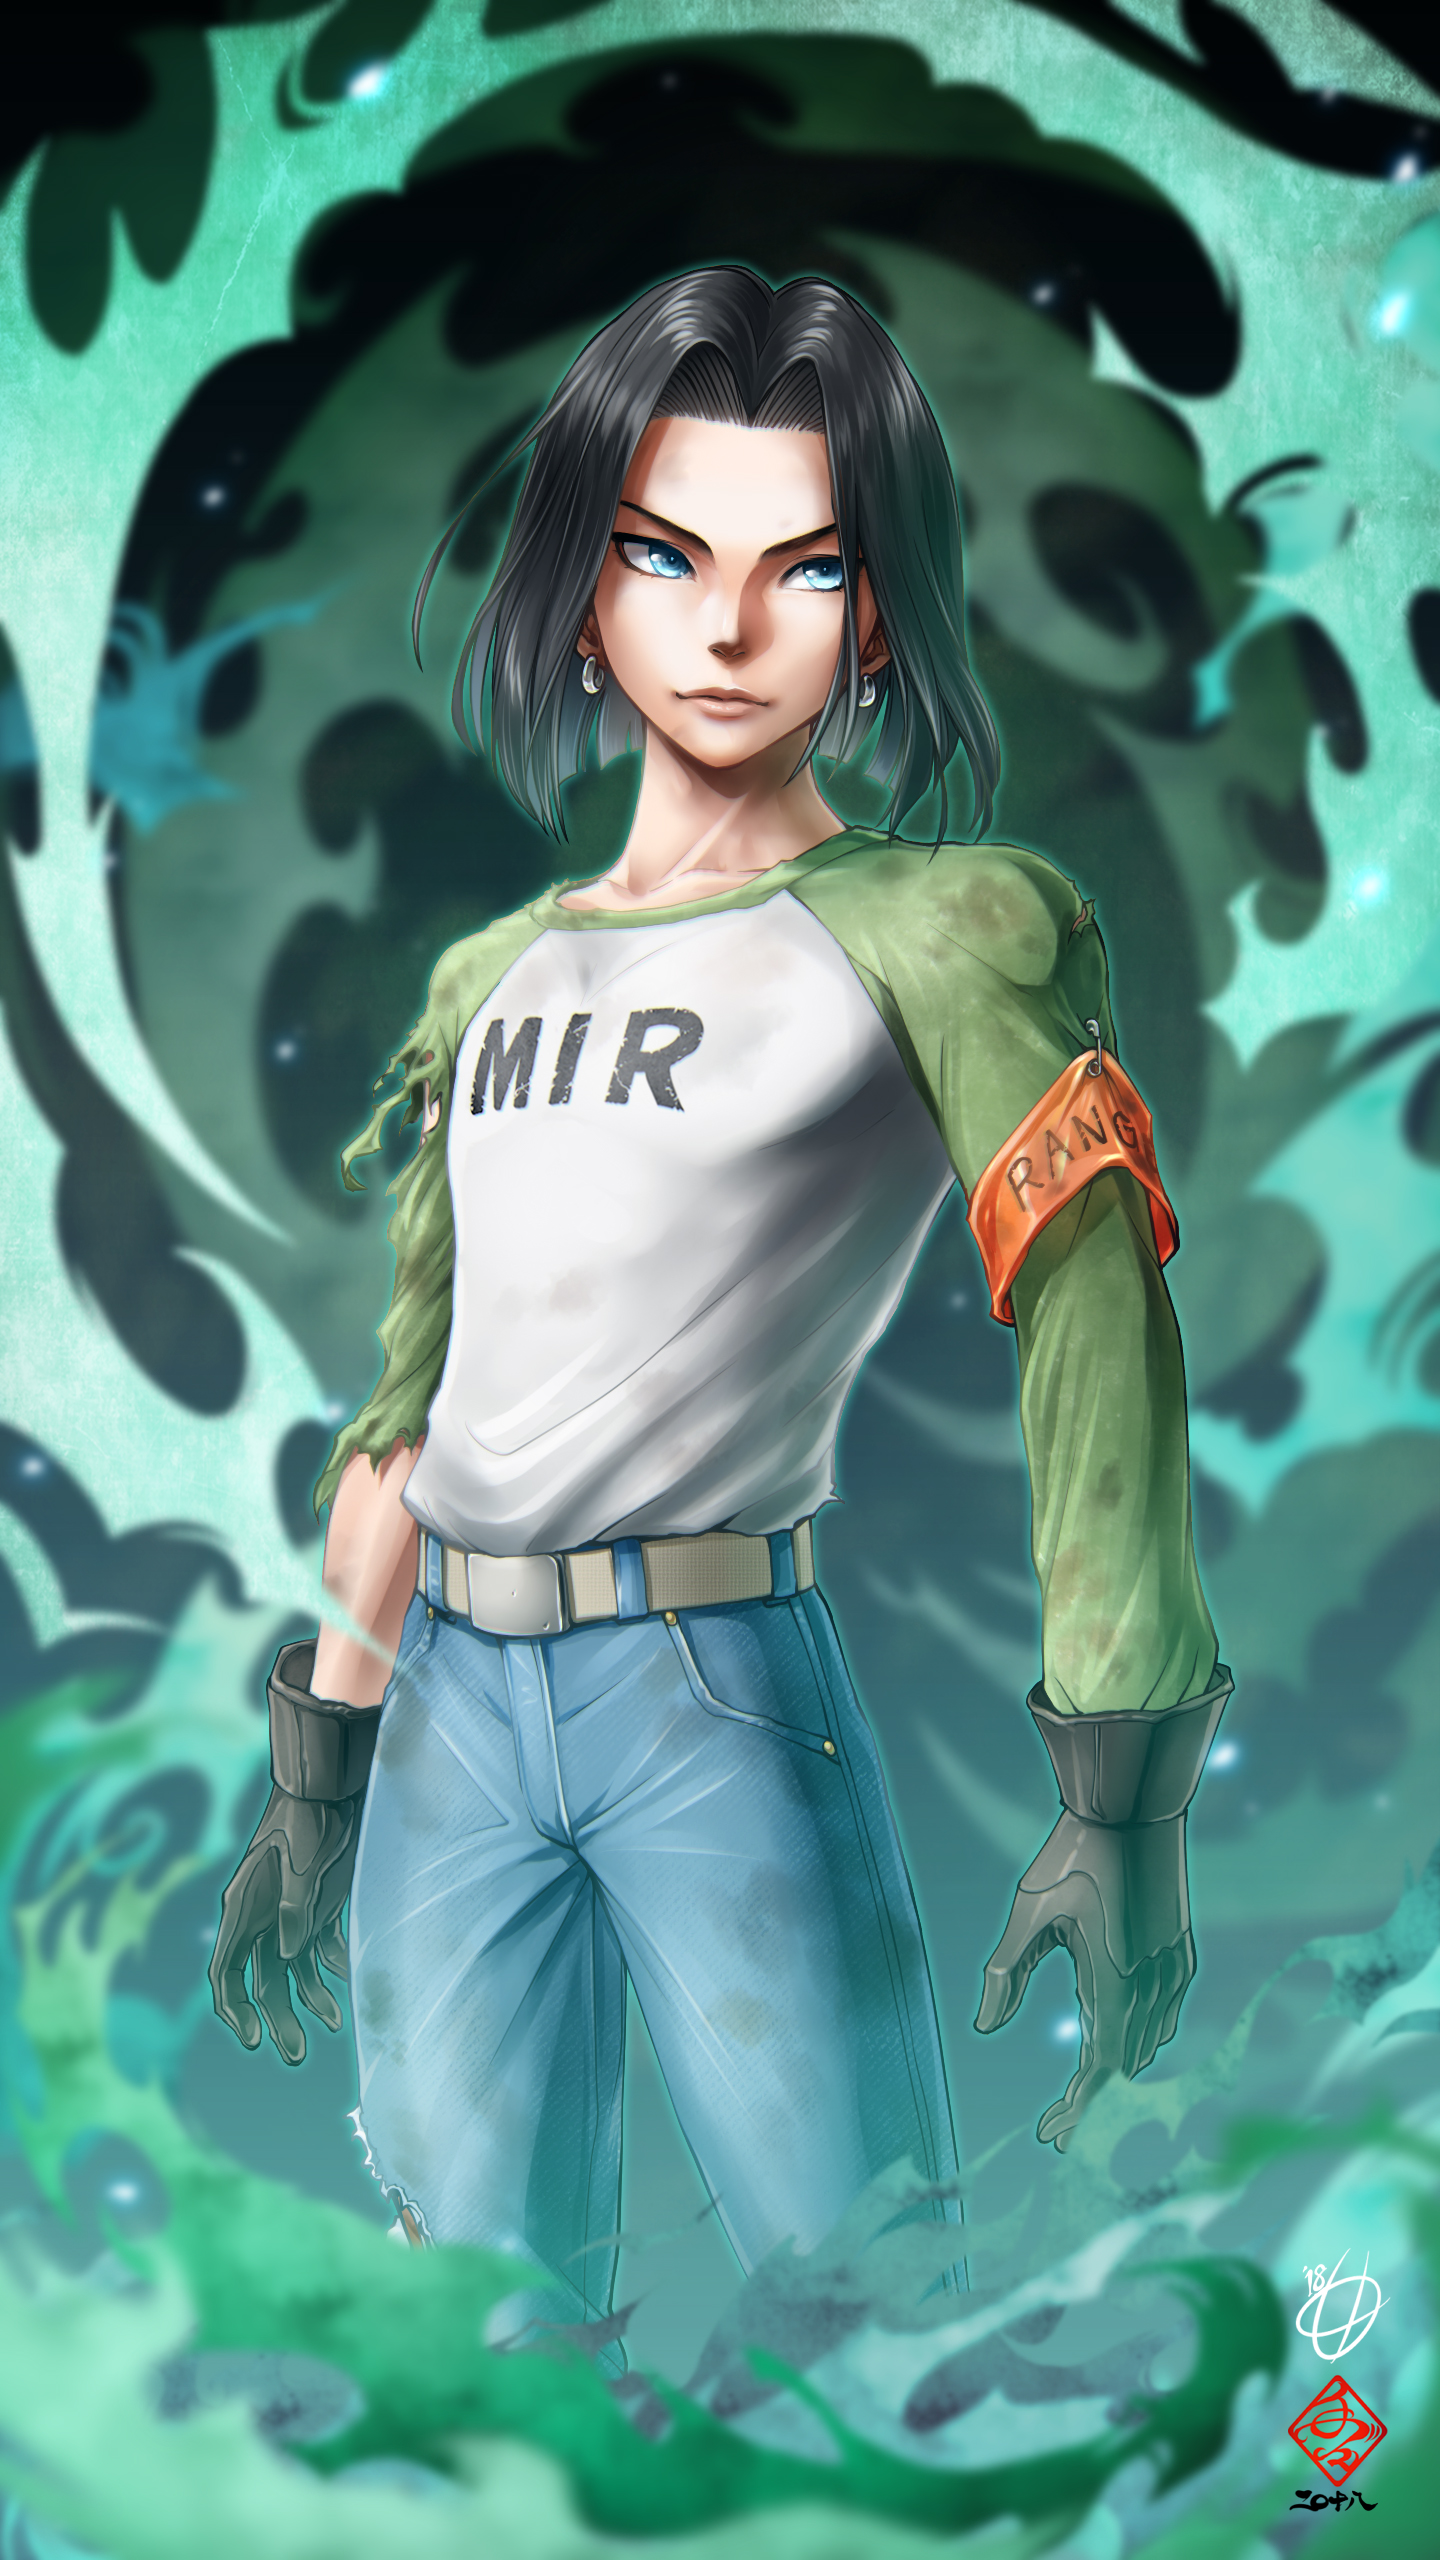 Android 17 Art Wallpapers - Wallpaper Cave.